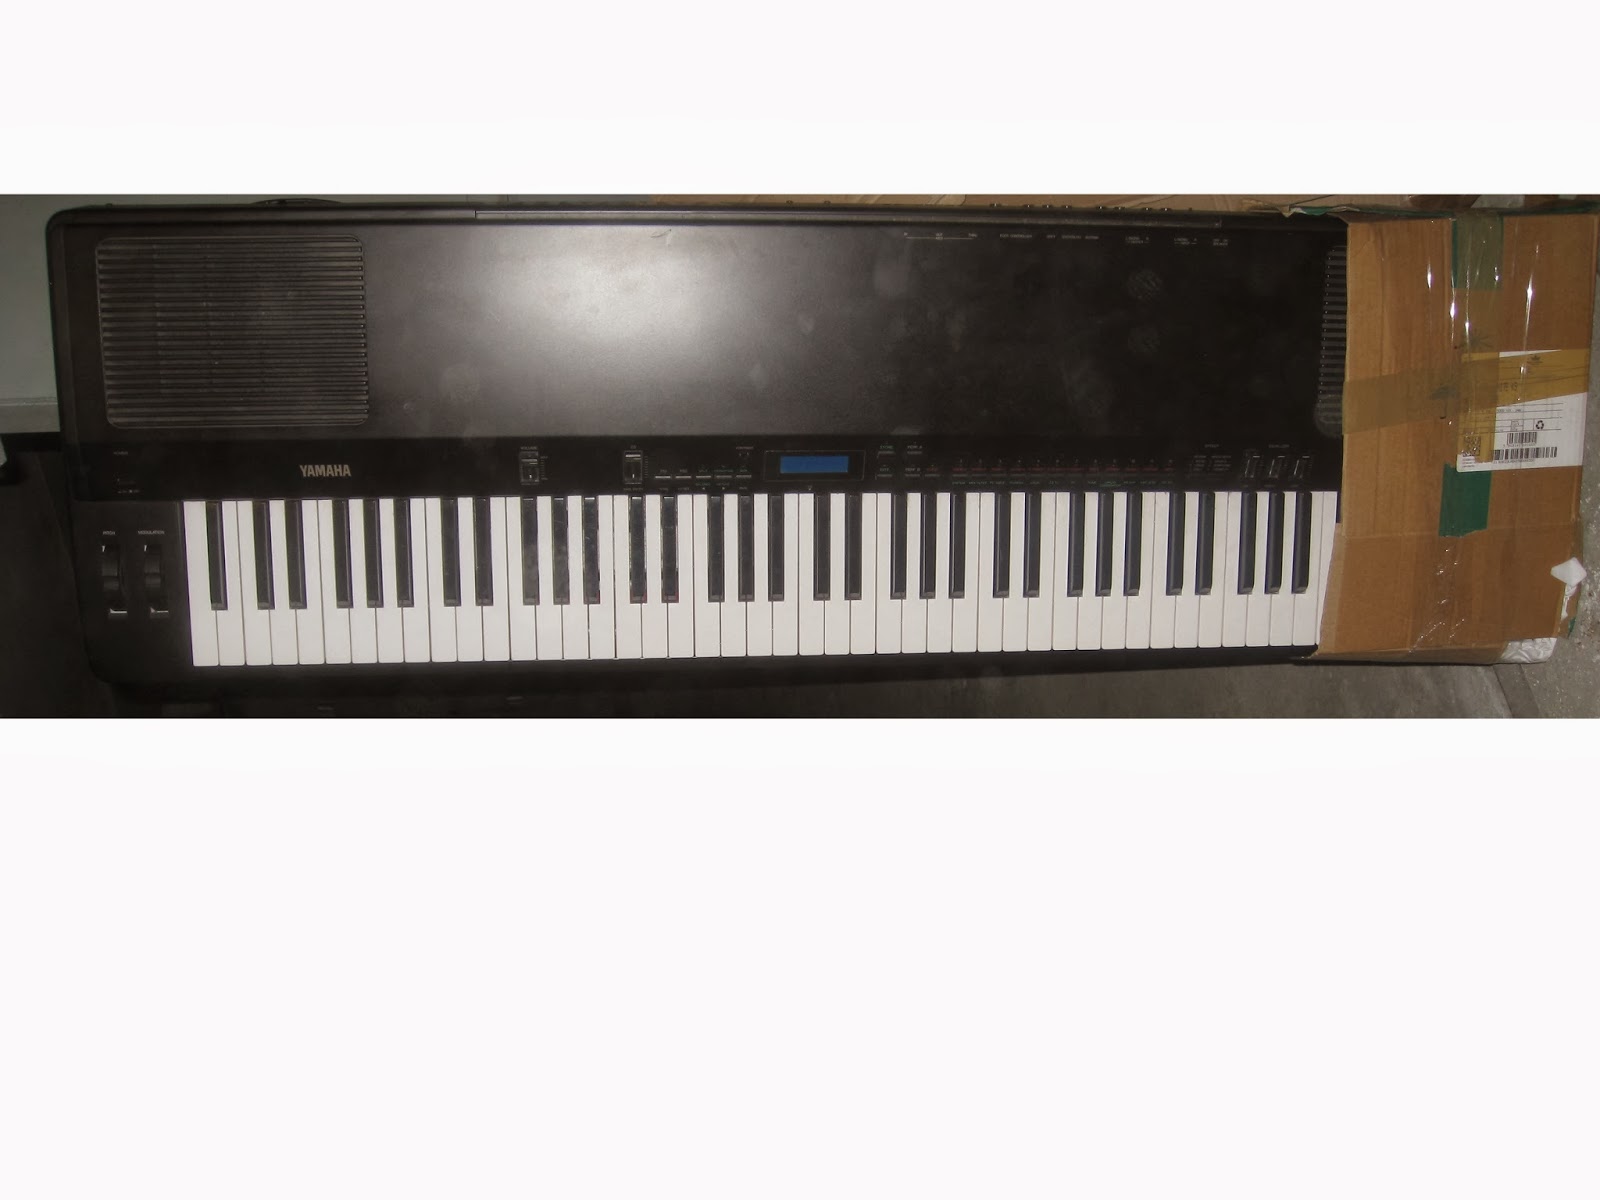 Infrequent Sound [sex.tex] technology: Yamaha P-150 Electronic Piano